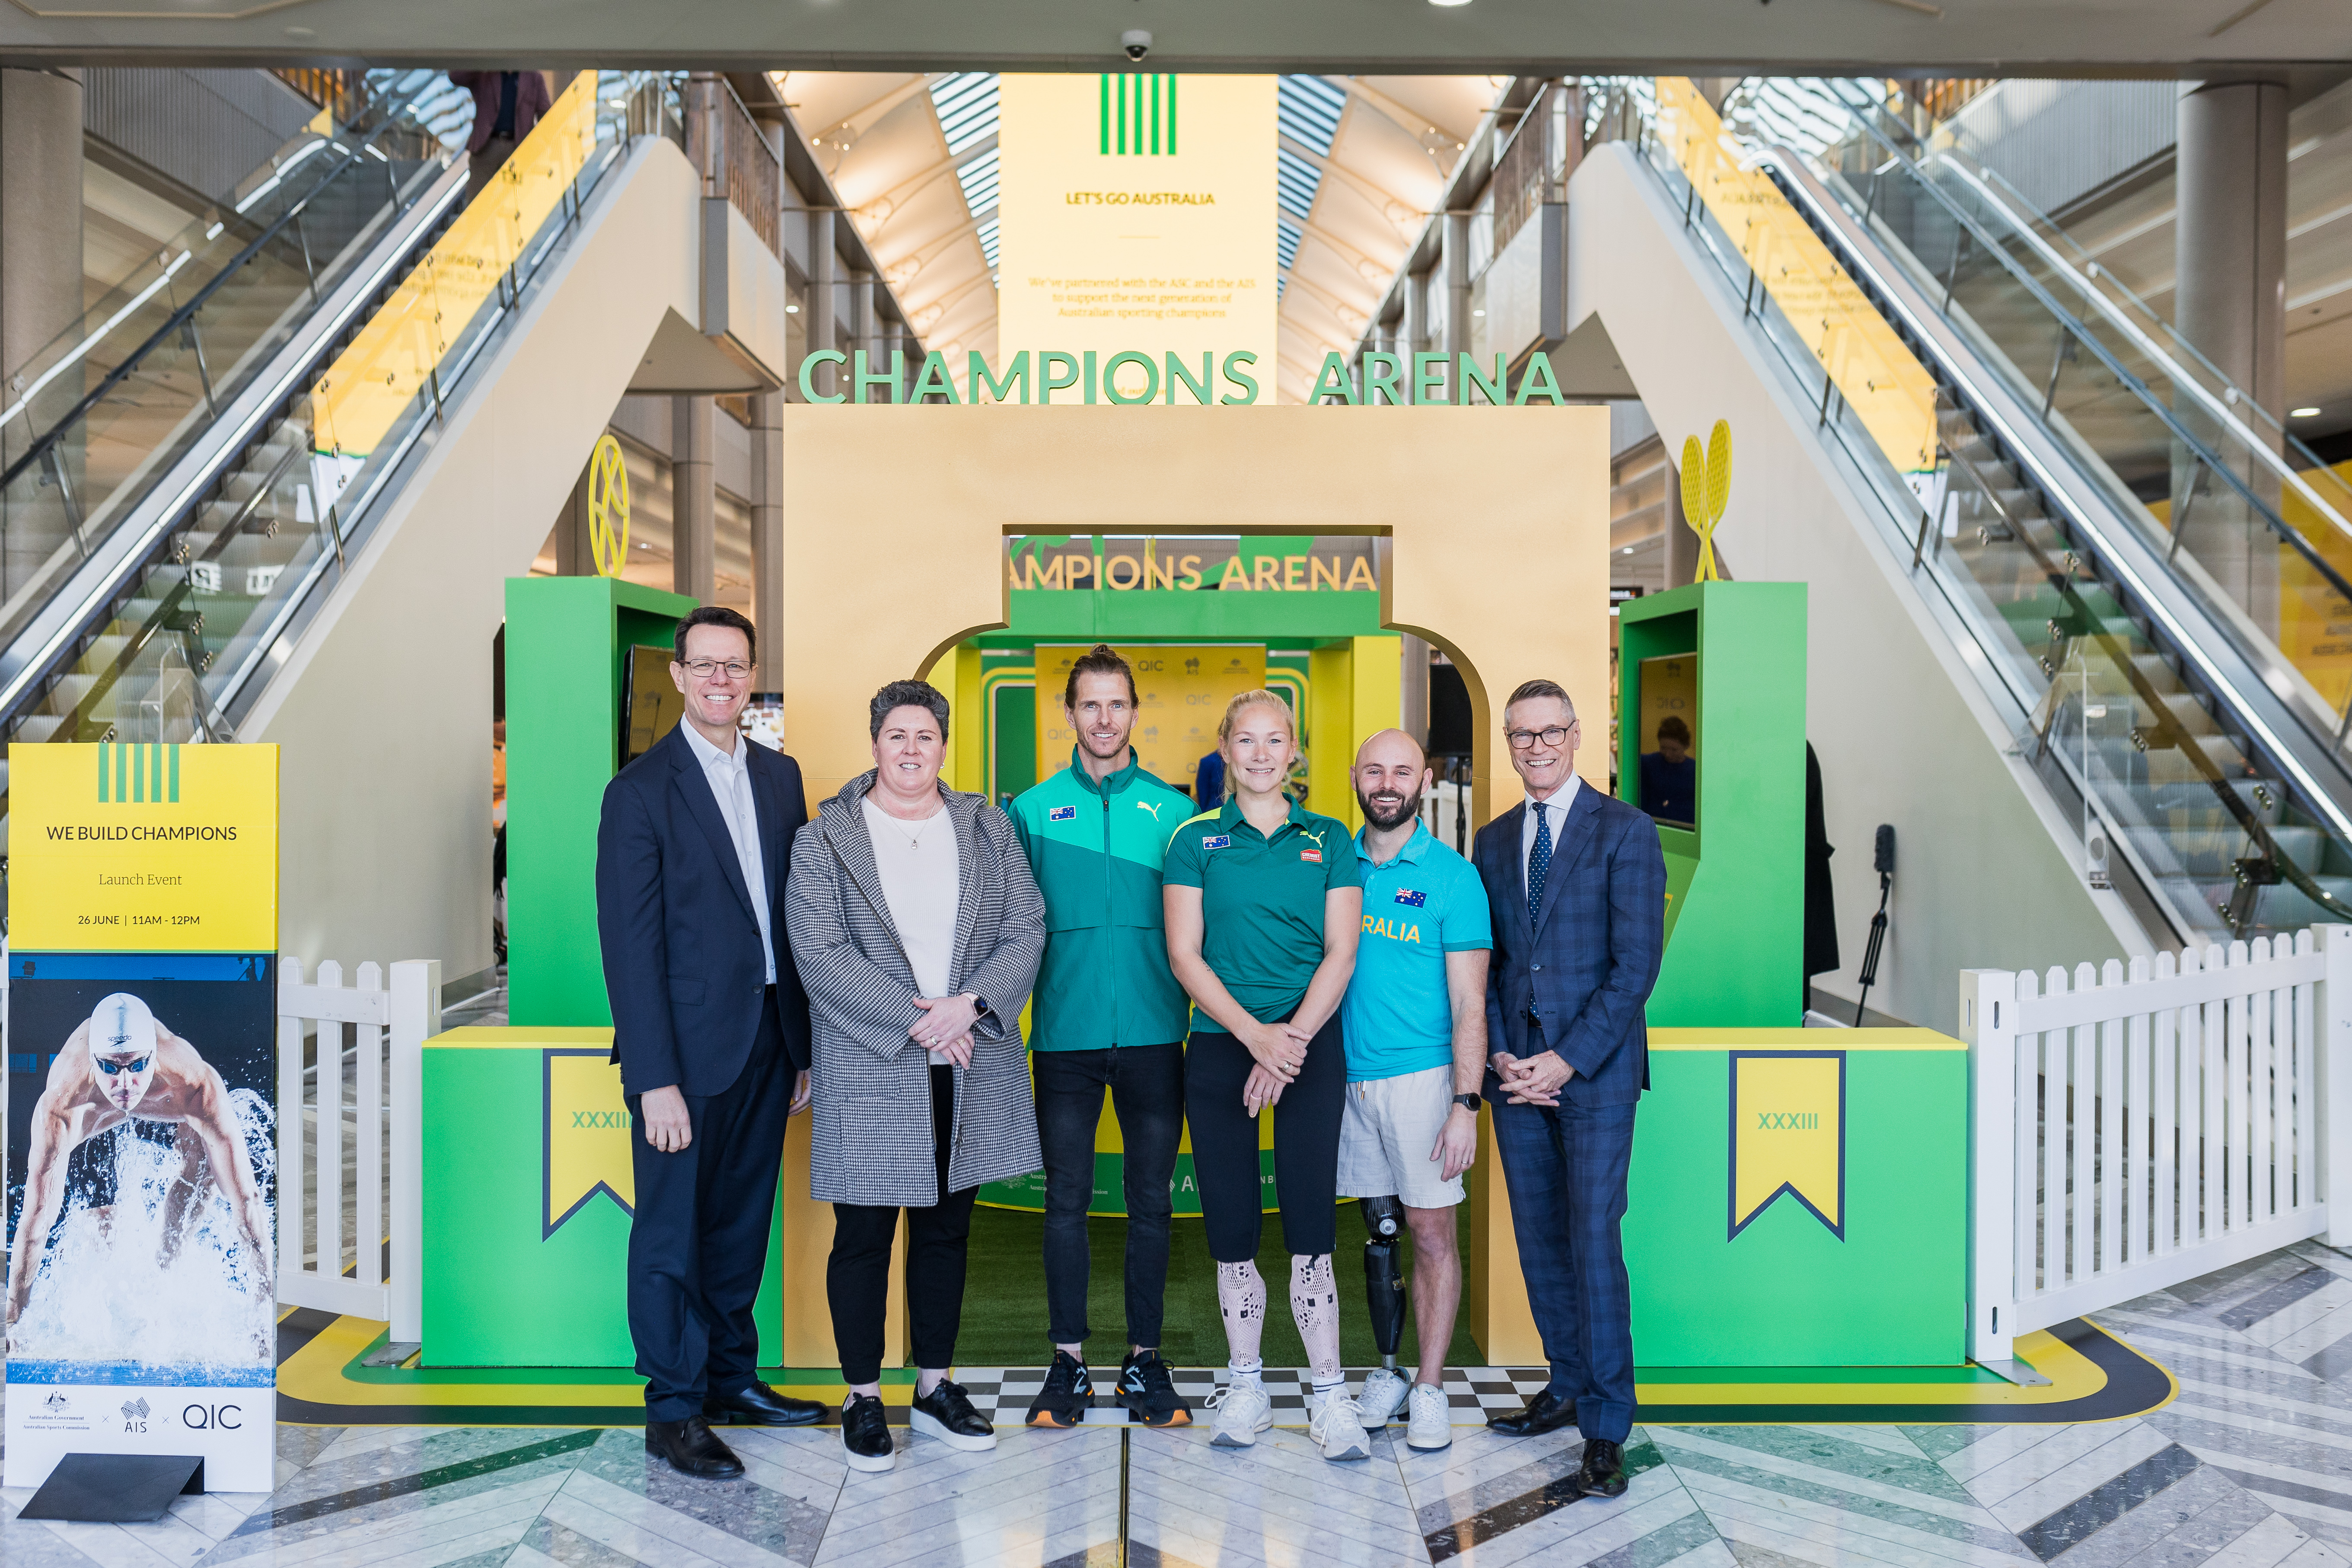 ASC CEO Kieren Perkins OAM, athletes and QIC Real Estate Managing Director Michael O’Brien standing in front of the shopping centre activation.